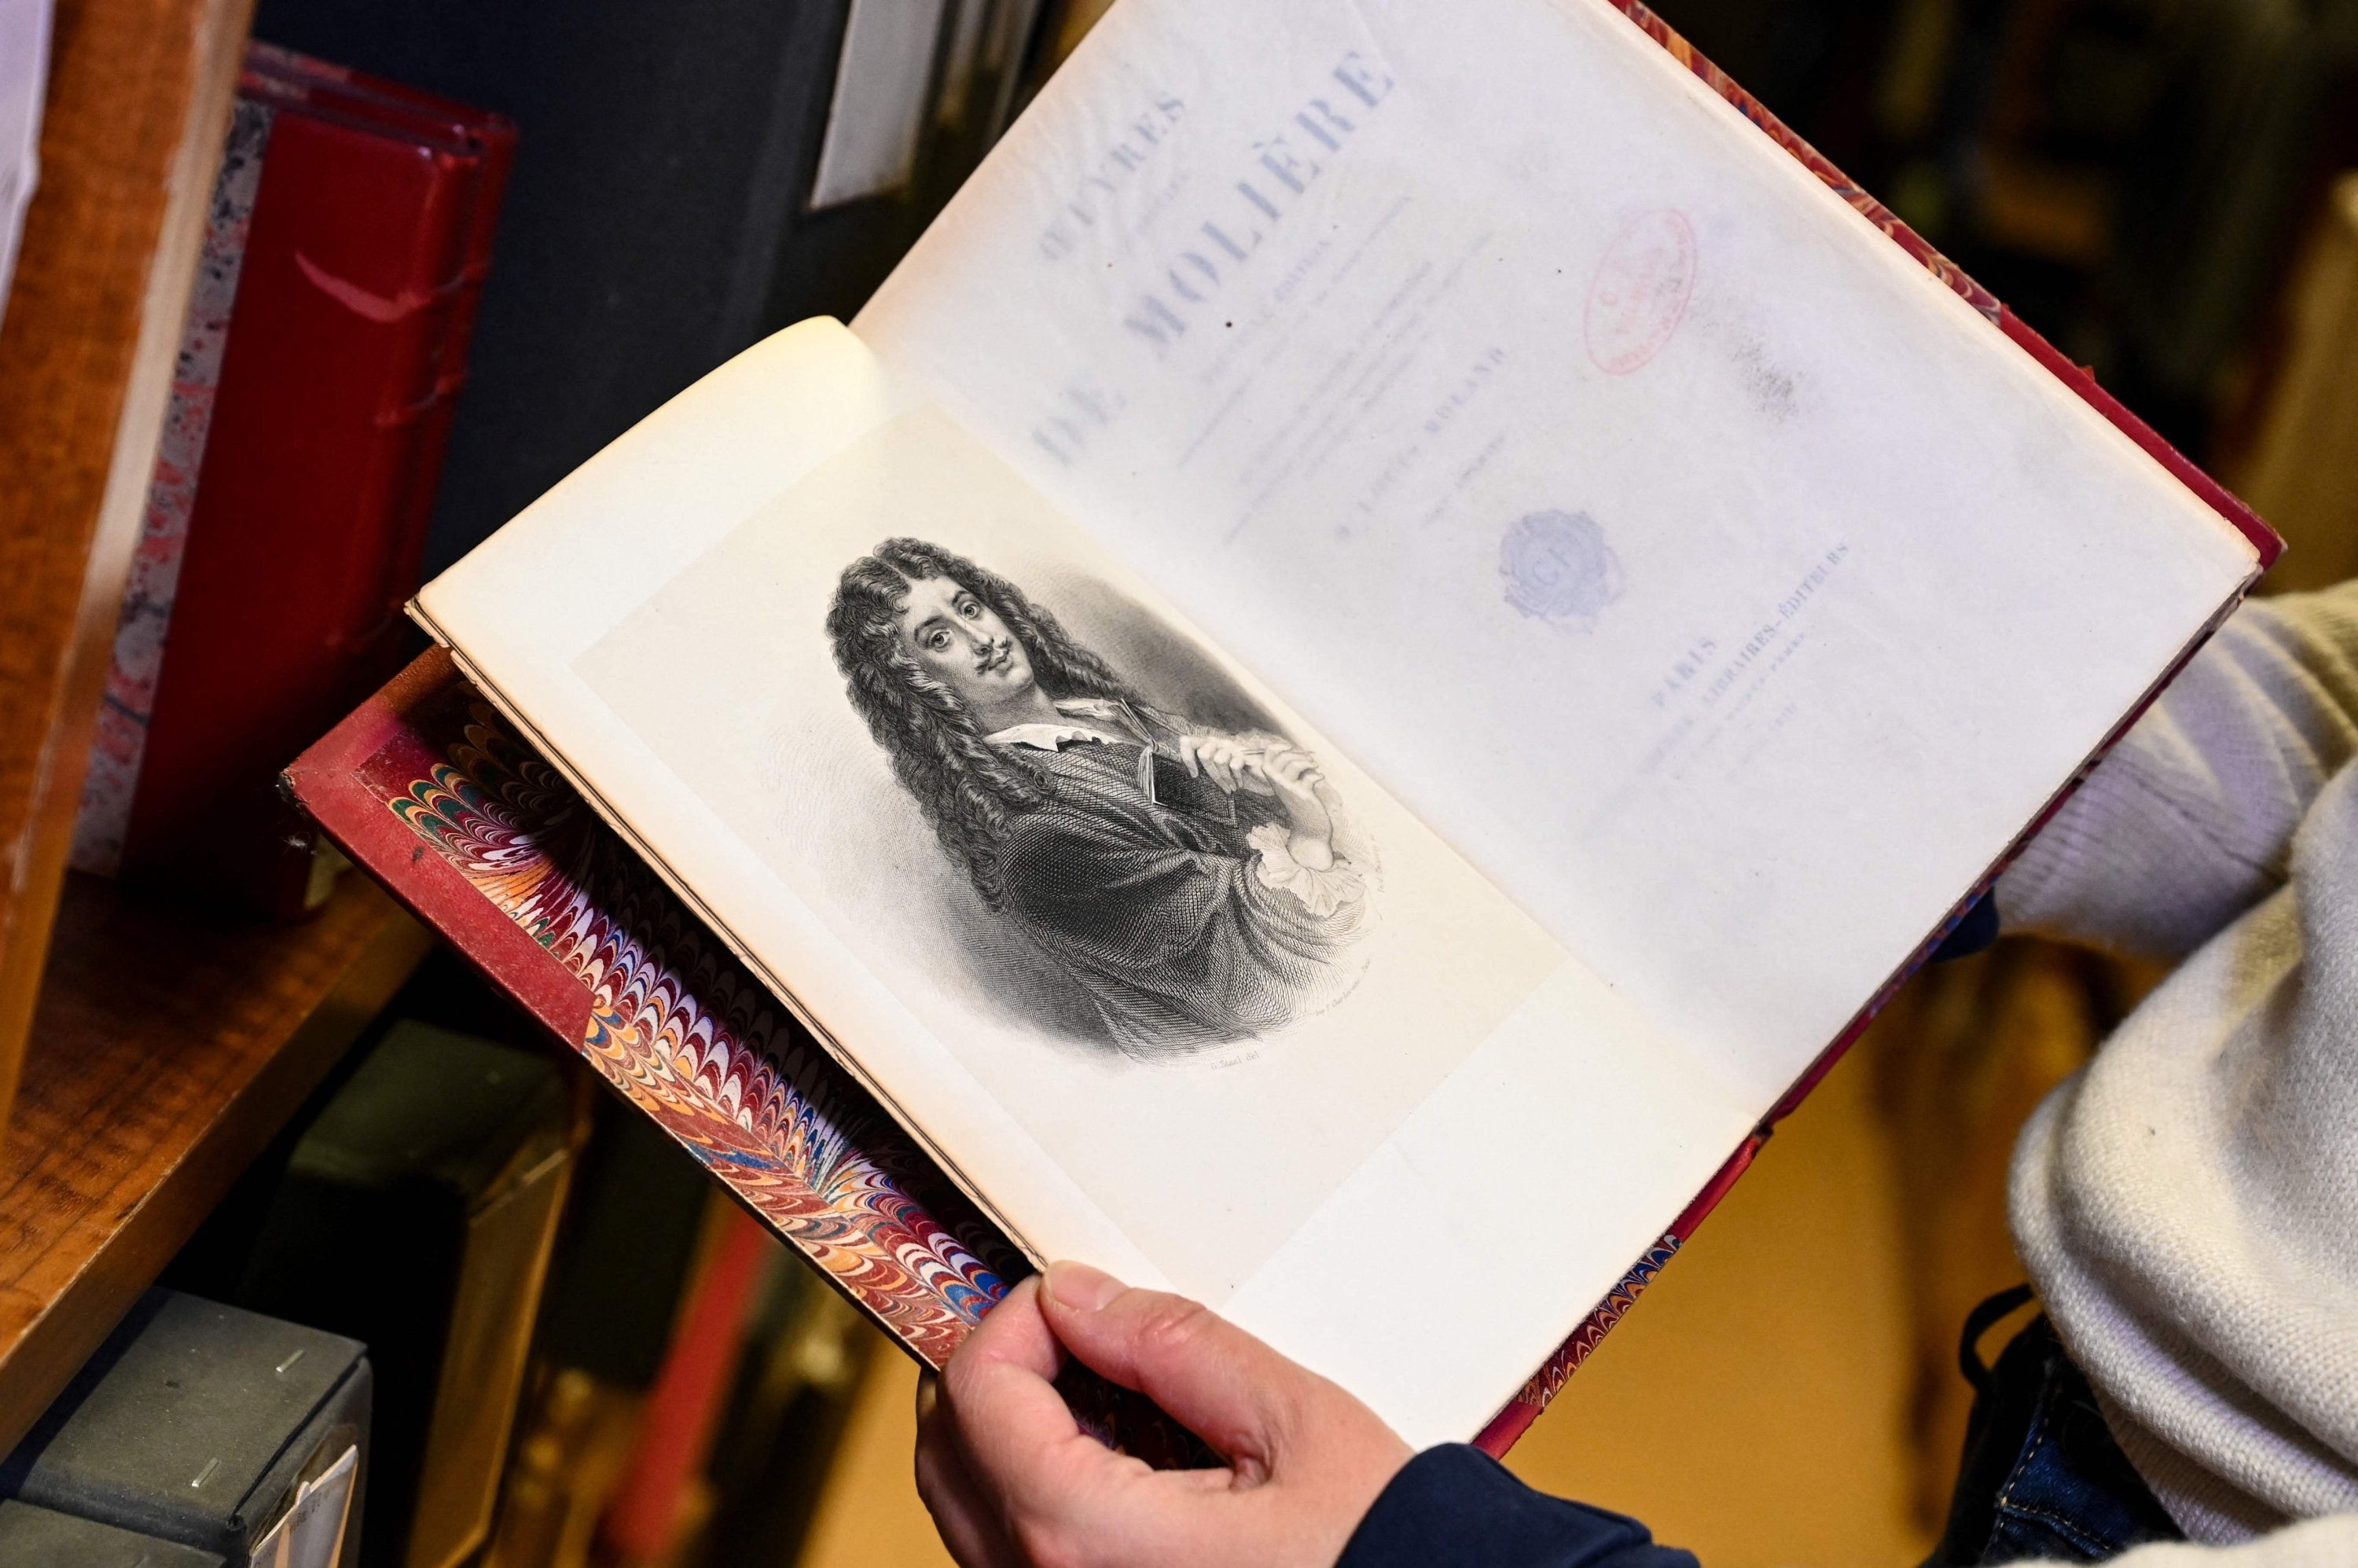 A page from an old anthology of plays by French playwright Moliere, at the Comedie Francaise library, in Paris, France, Dec. 14, 2021. (AFP Photo)